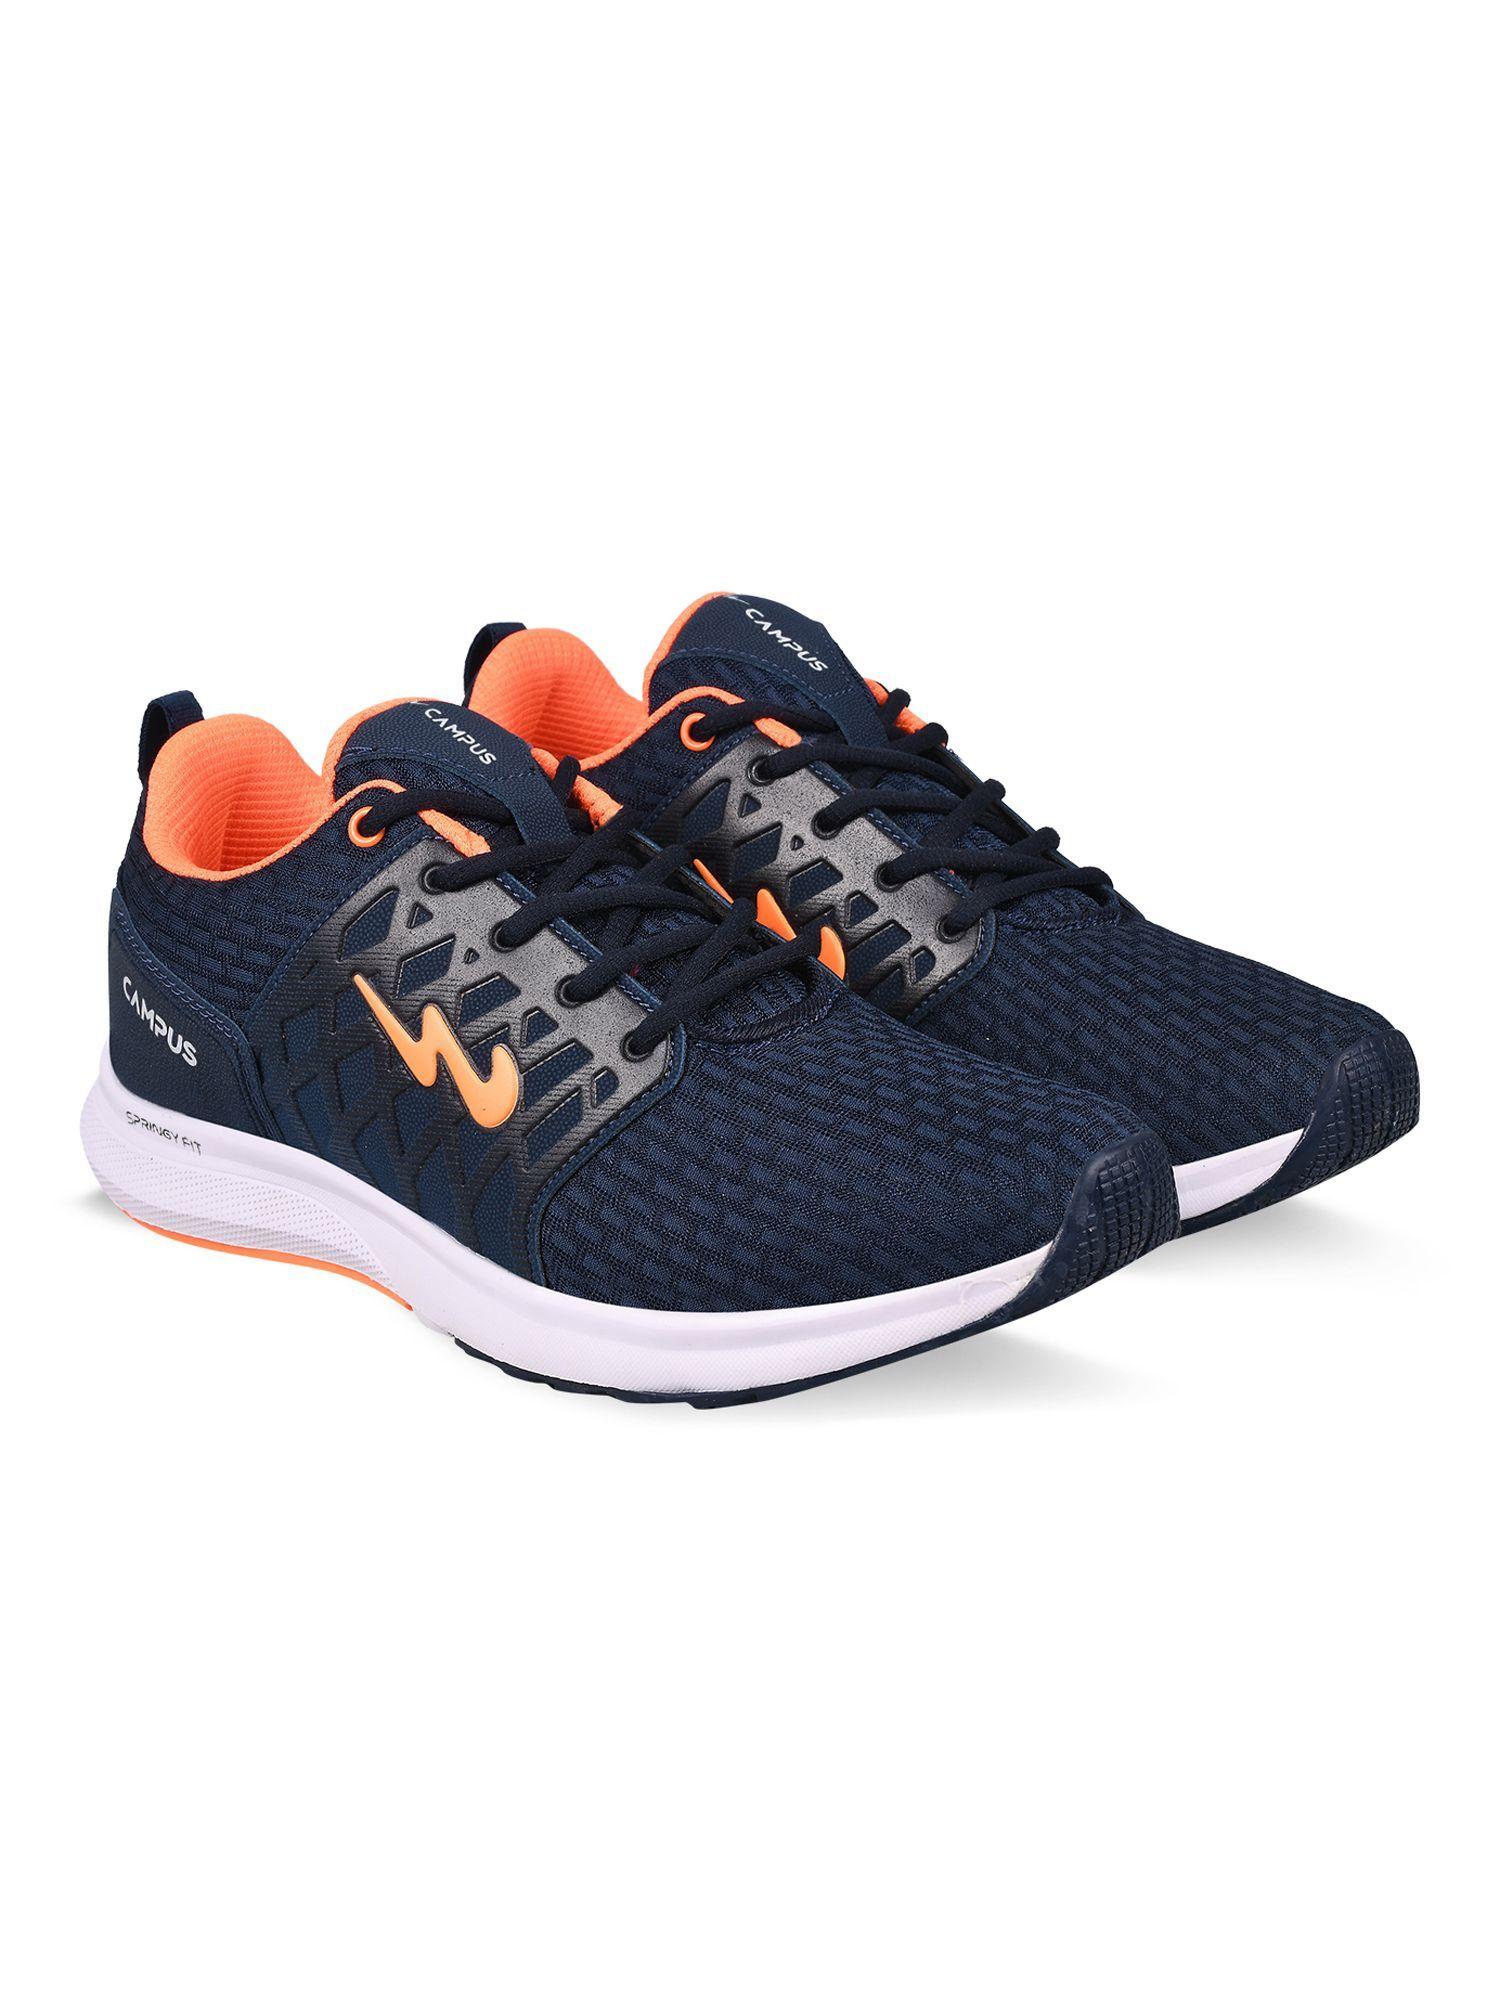 rodeo pro blue mens running shoes